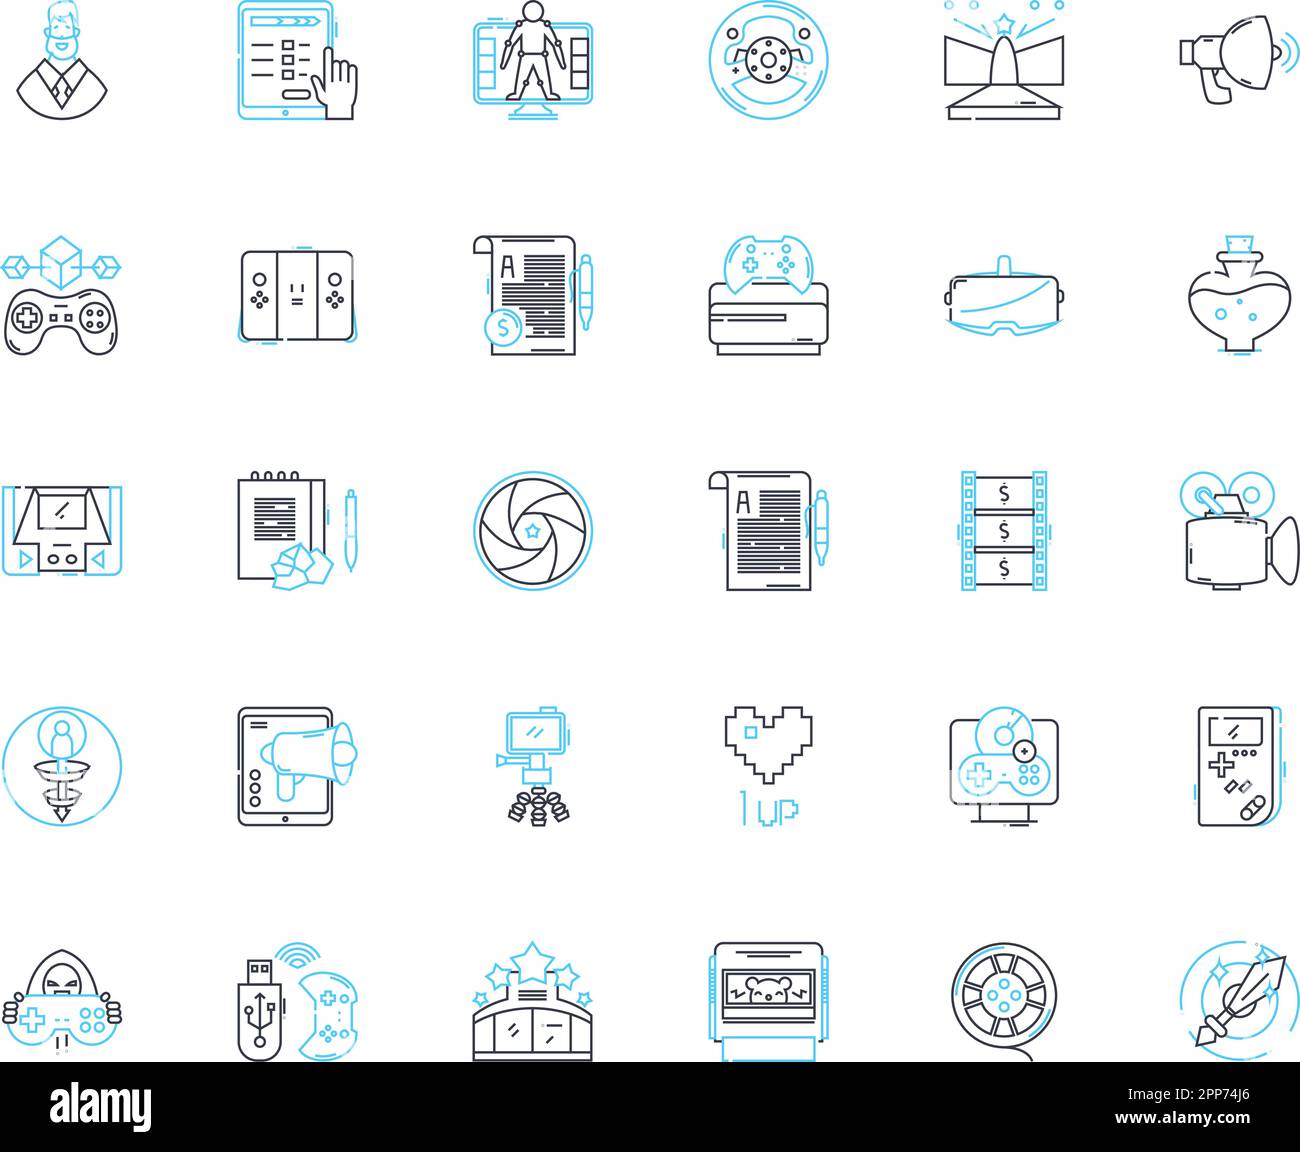 Audiovisual market linear icons set. Projection, Recording, Playback, Editing, Streaming, Production, Soundscapes line vector and concept signs Stock Vector